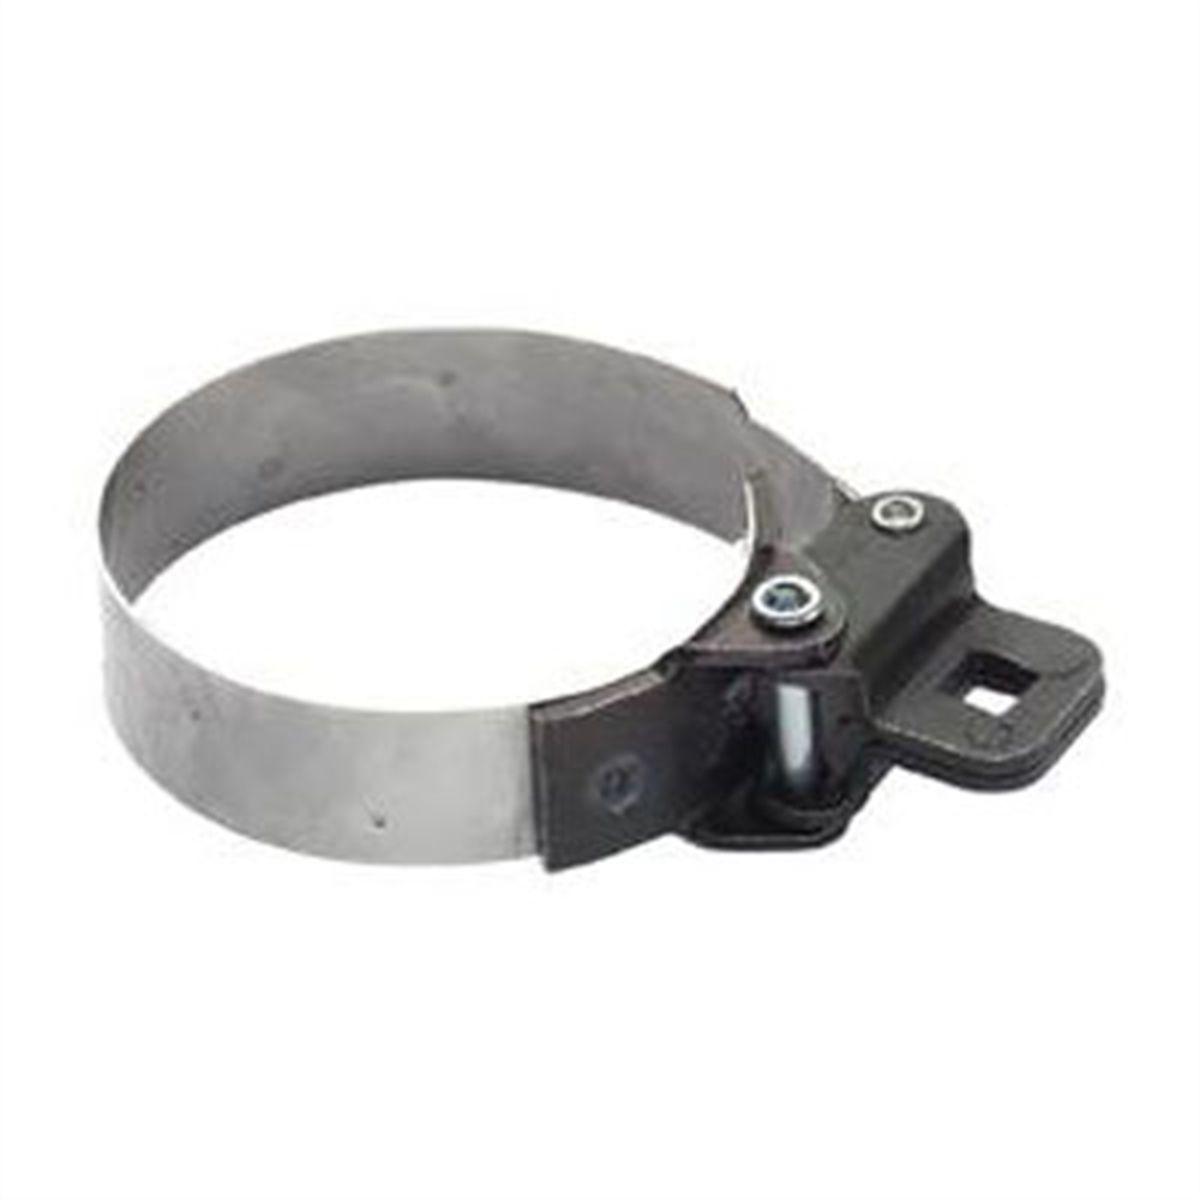 Plews 70635 Pro Tuff 3/8 Rachet Drive Small Band Filter Wrench PL70635